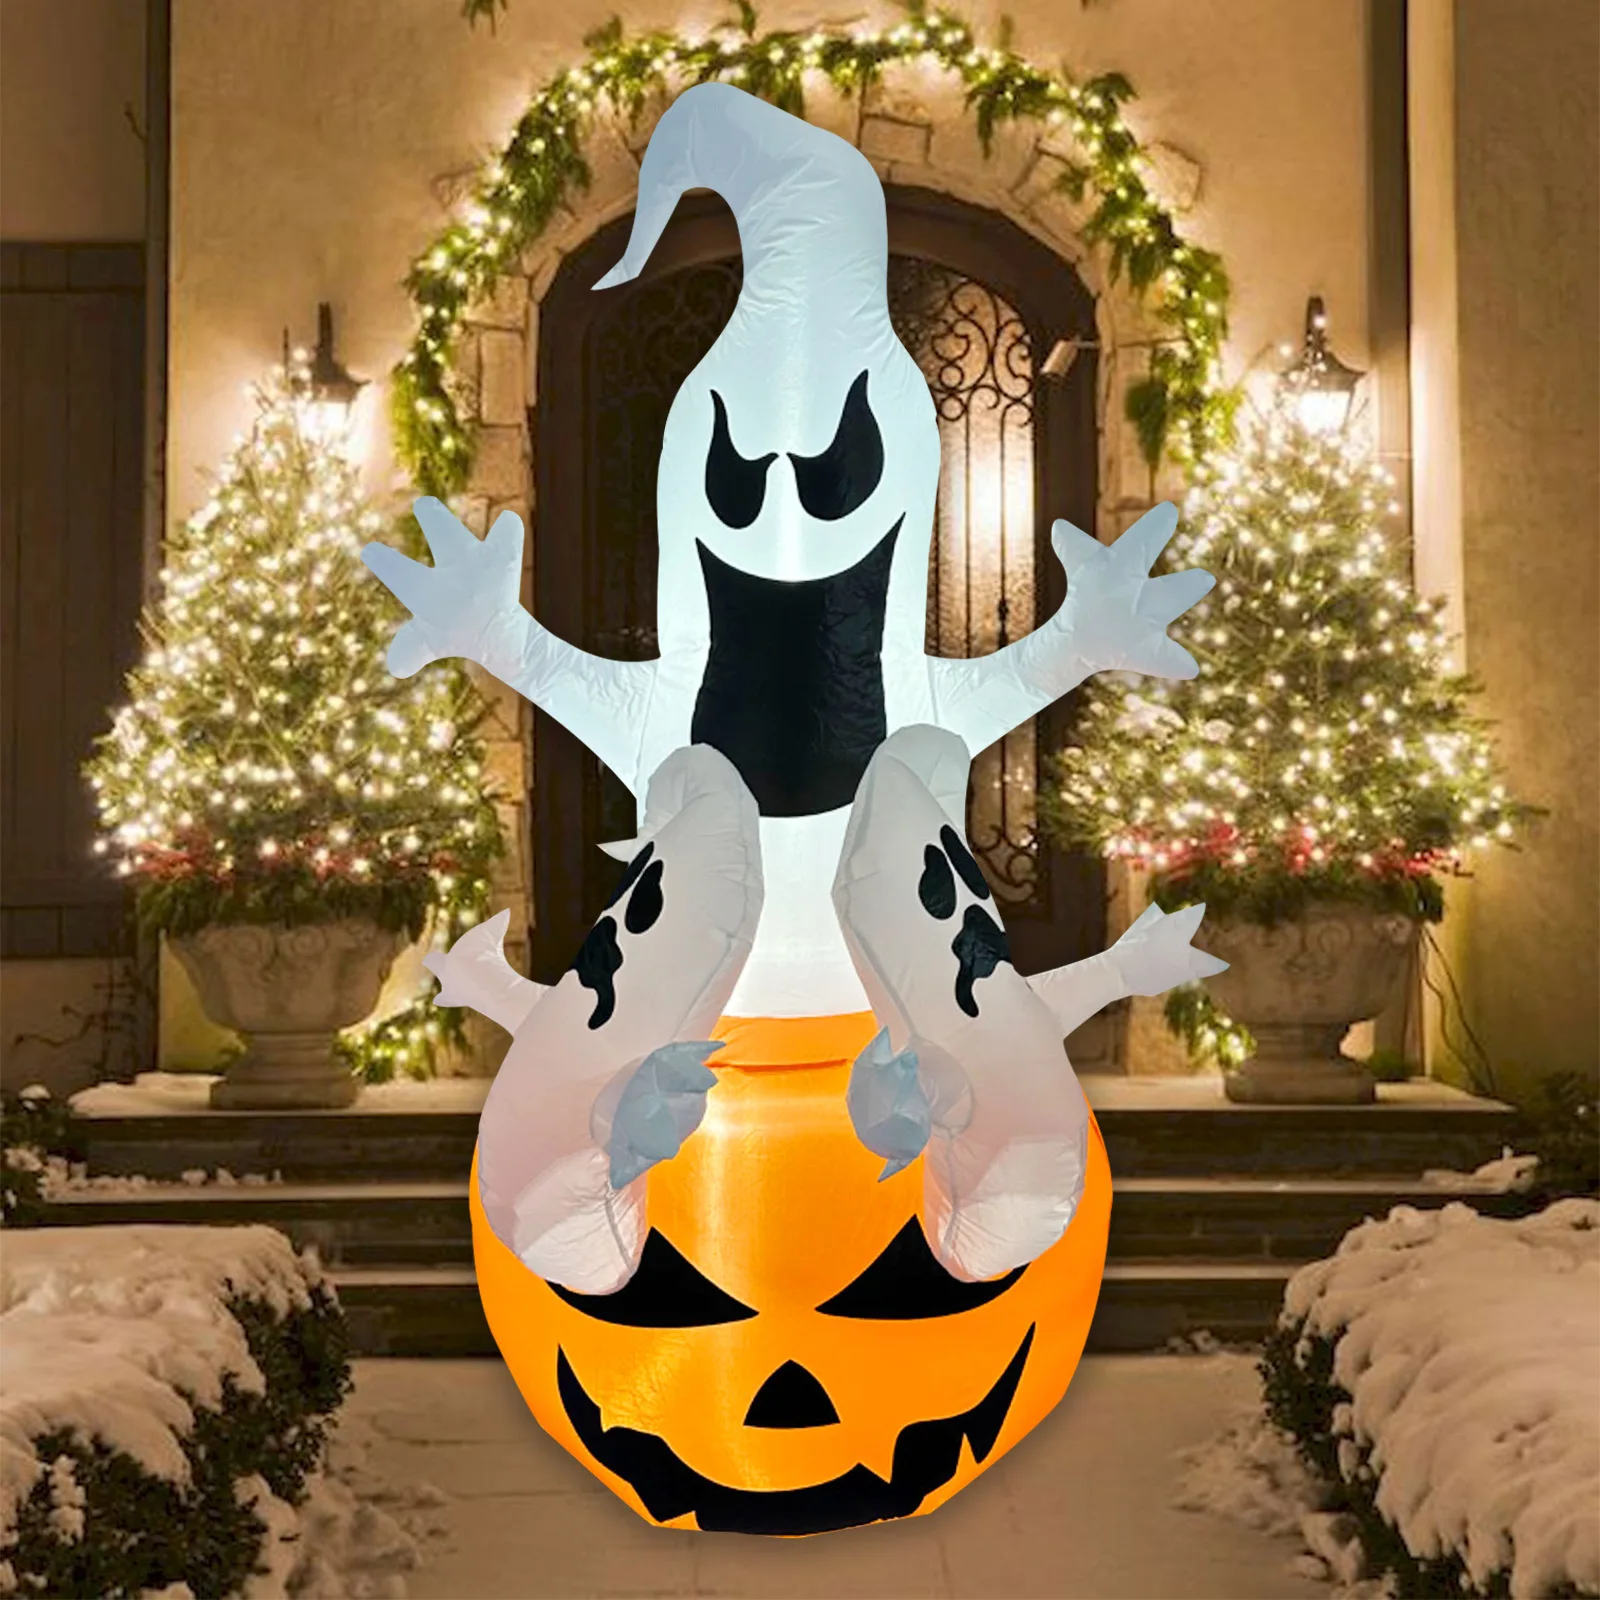 led-inflatable-halloween-lights-ghost-scary-with-color-changing-home-gardens-courtyard-halloween-decor-glowing-ghost-props-lamps